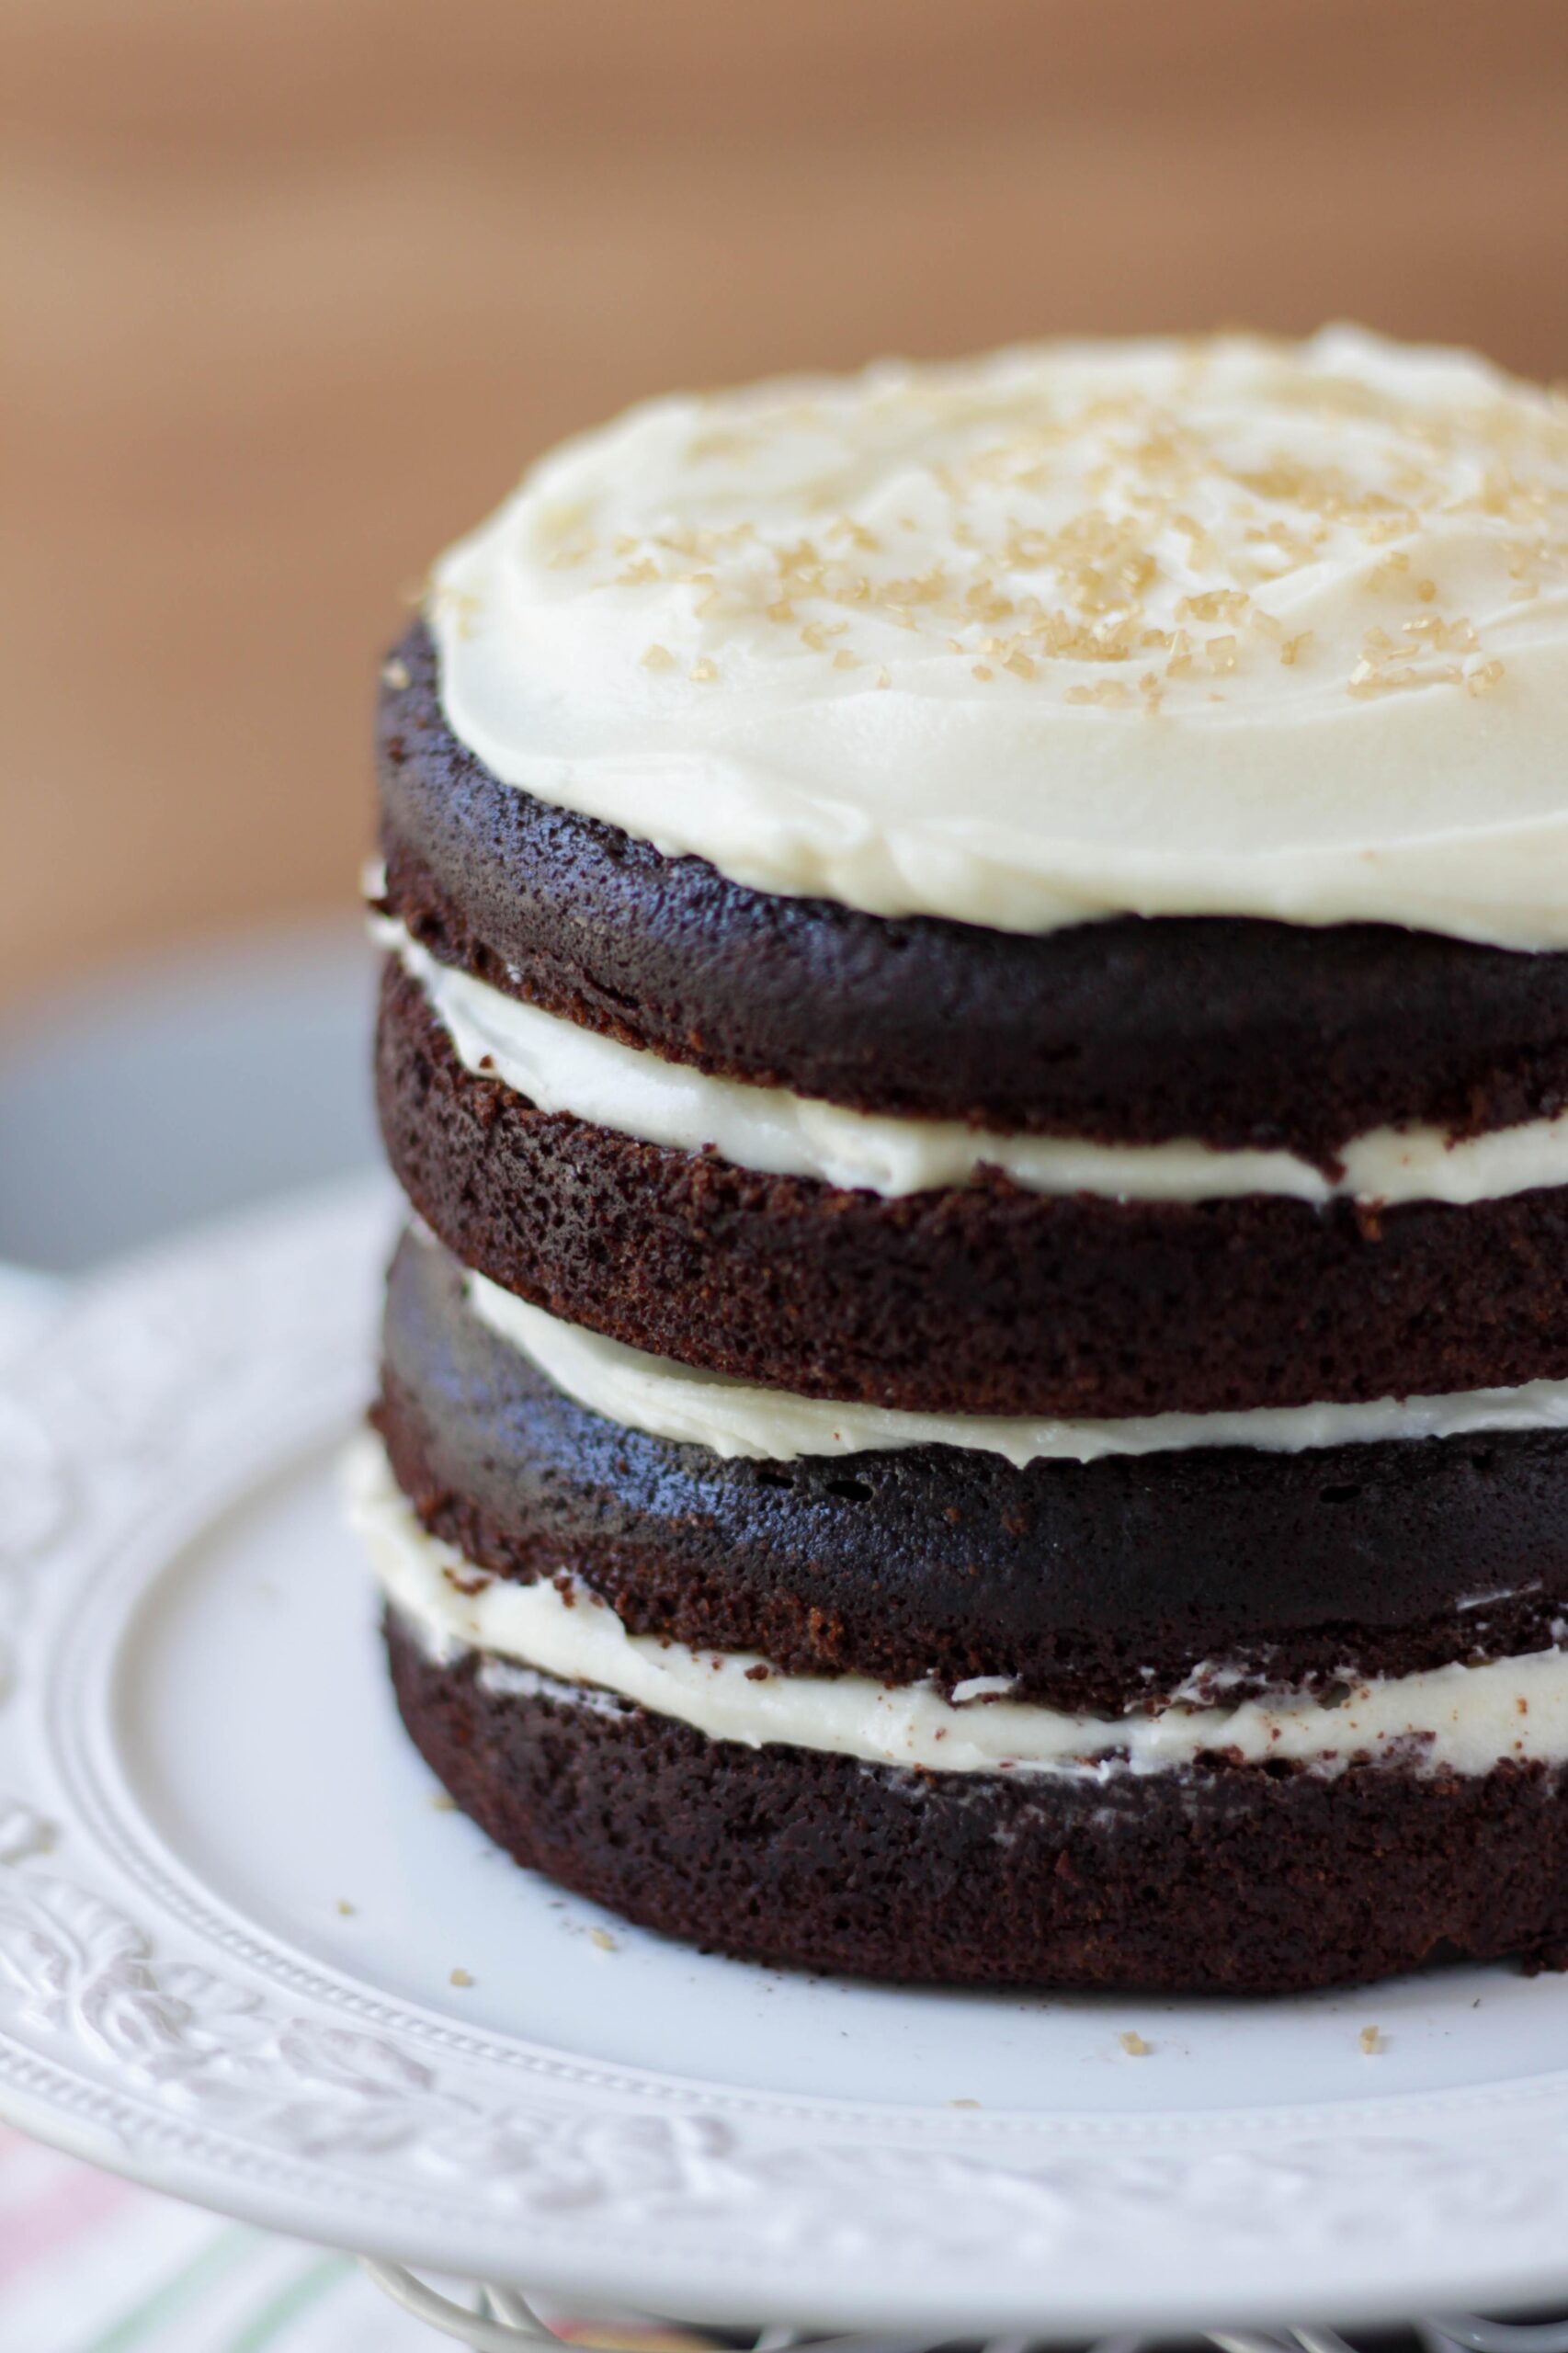  This cake is a triple threat: moist, rich, and boozy.